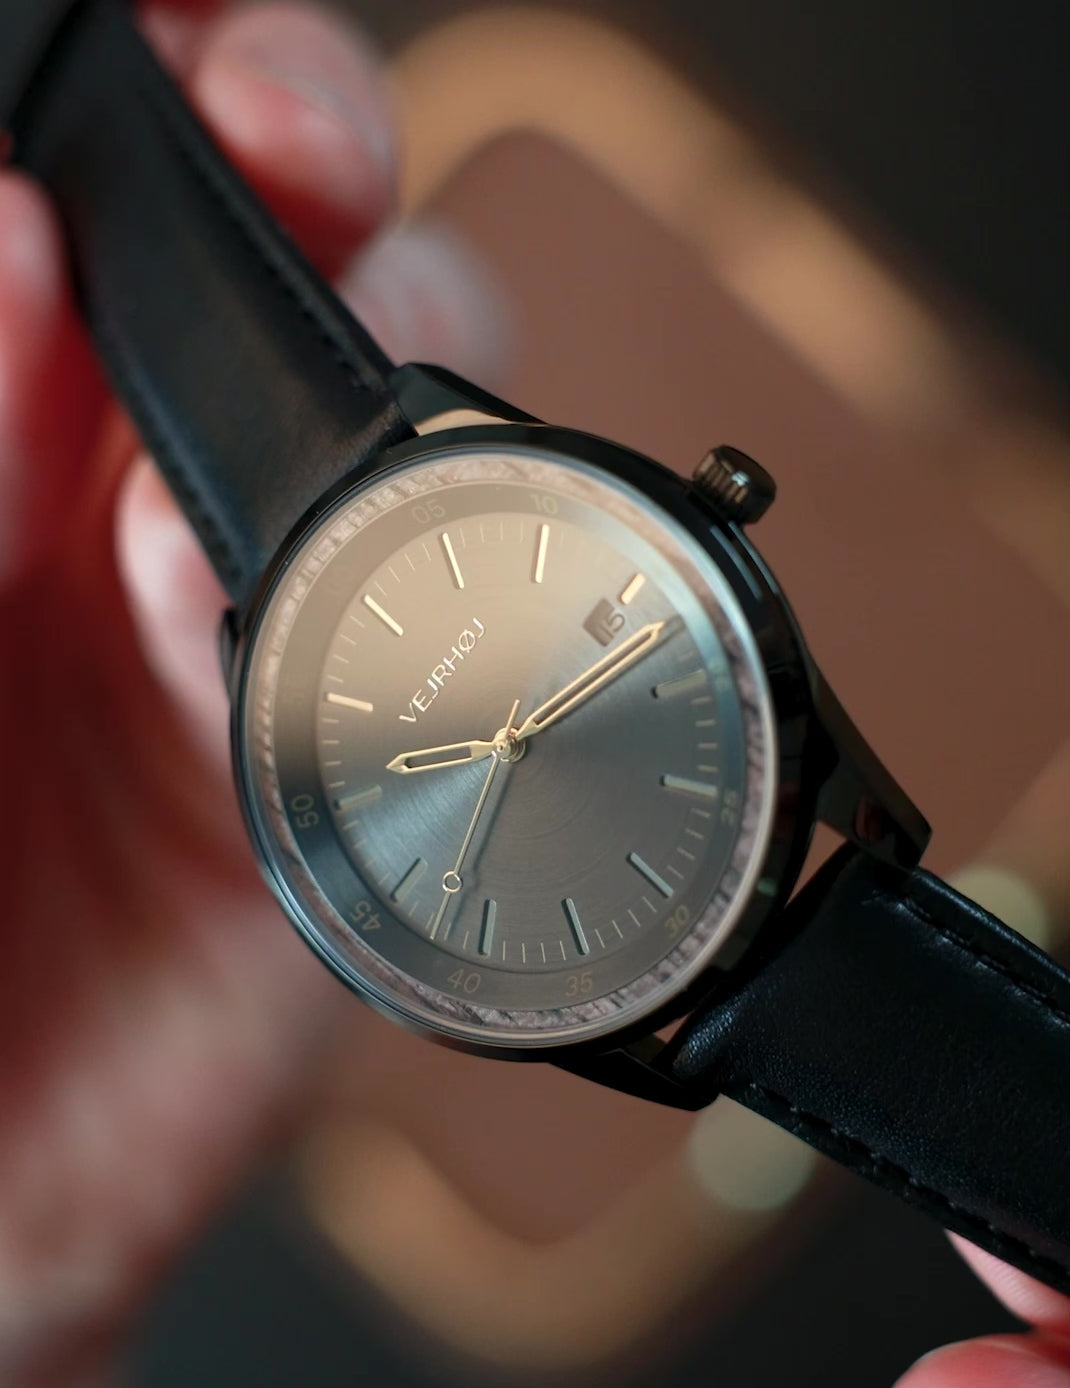 The black automatic wrist watch from VEJRHOJ being presented and seen from all sides